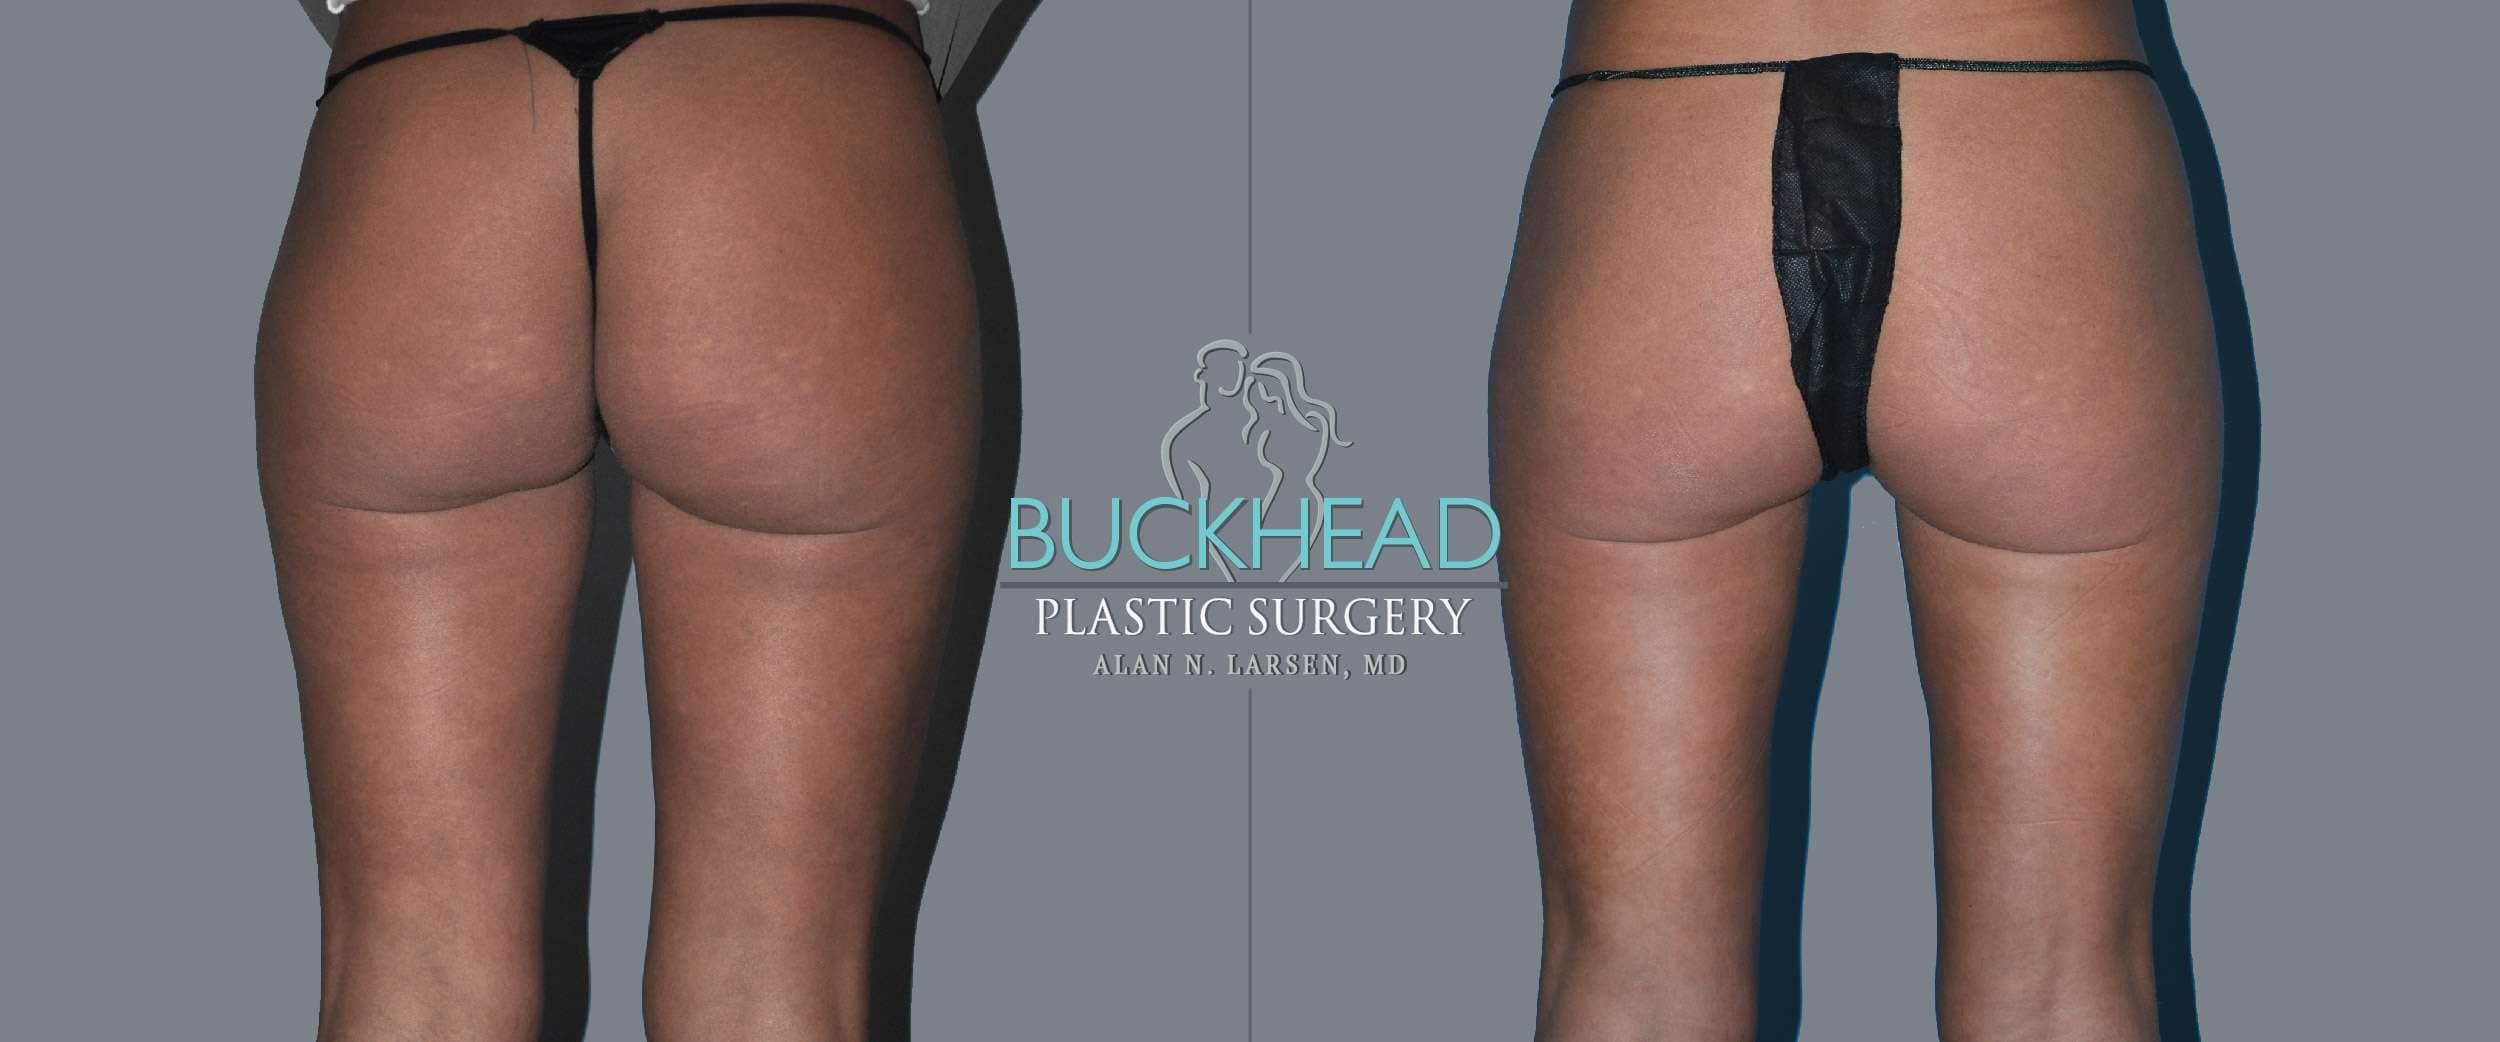 Before and After Photo Gallery | Liposuction - Thigh Back | Buckhead Plastic Surgery | Alan N. Larsen, MD | Double Board-Certified Plastic Surgeon | Atlanta GA